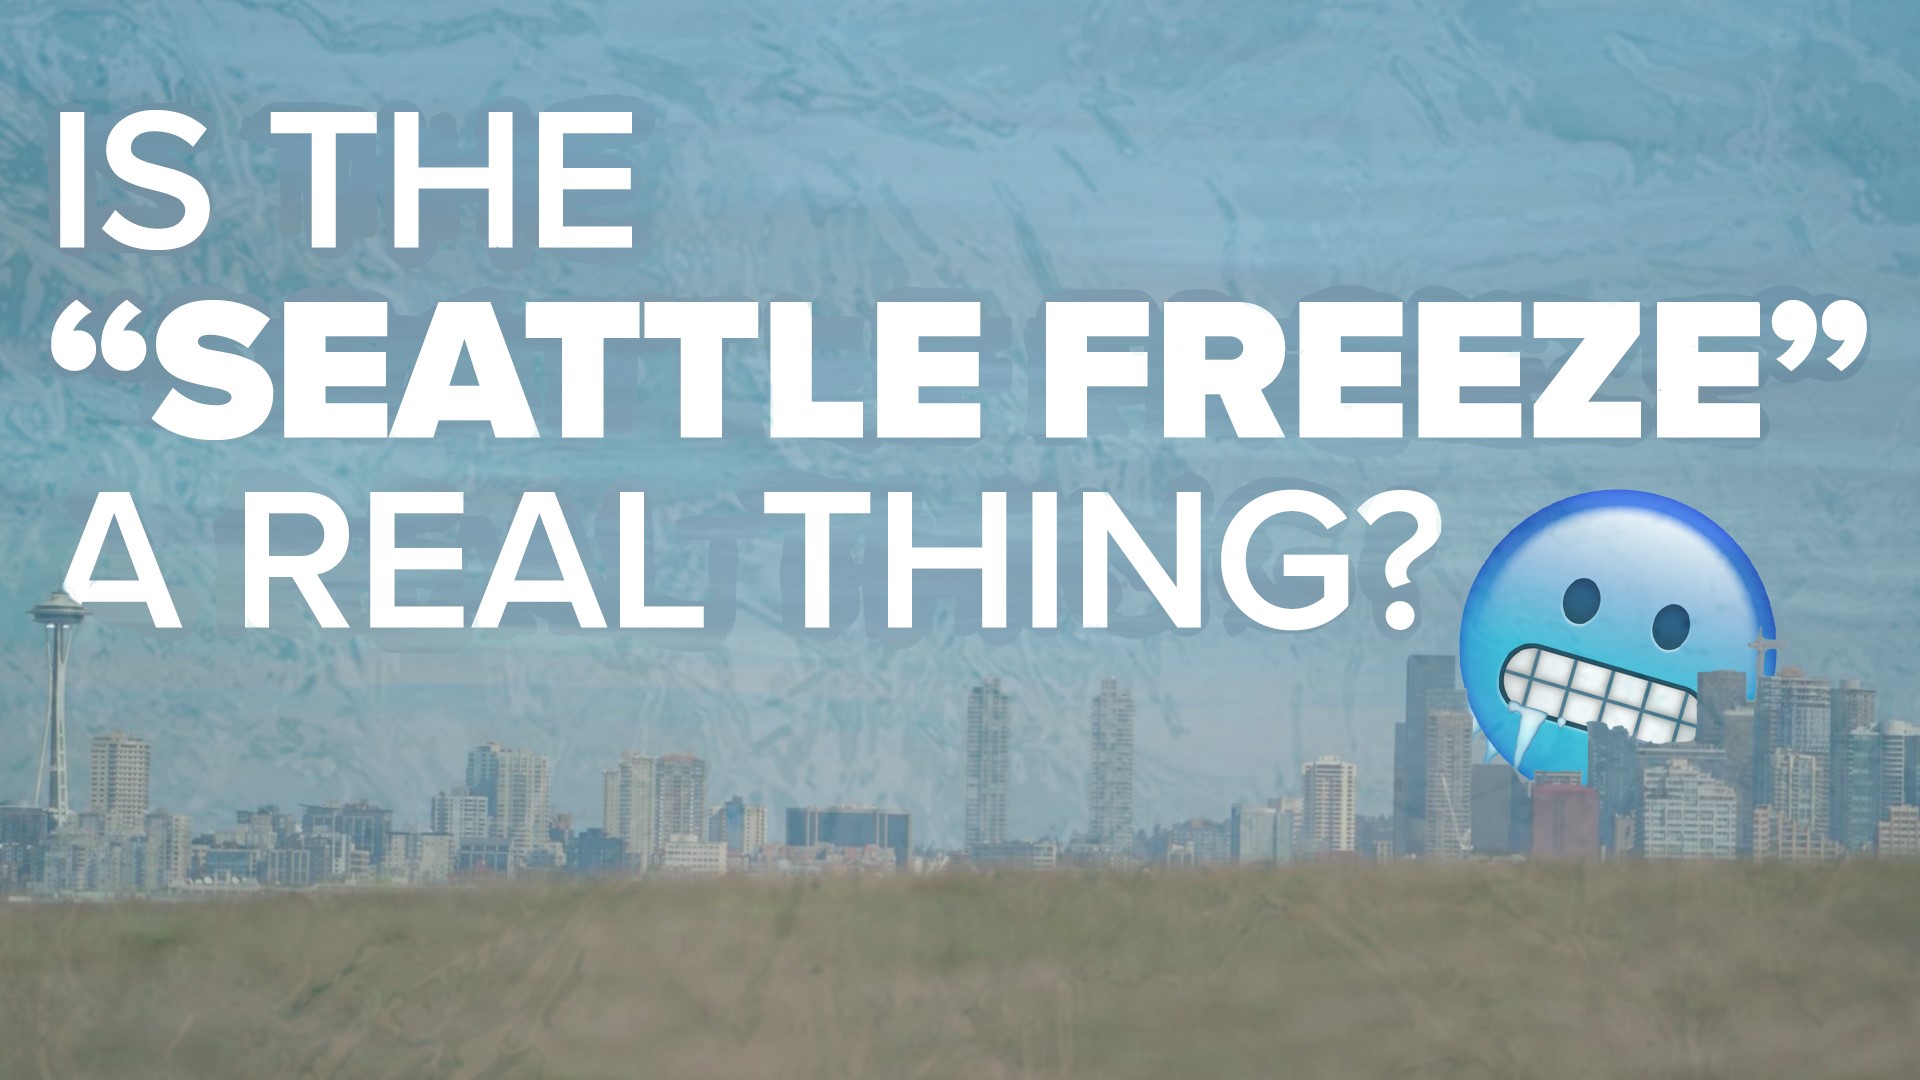 Is the Seattle Freeze real? Brit Moorer, a Seattle transplant, looks into the issue.